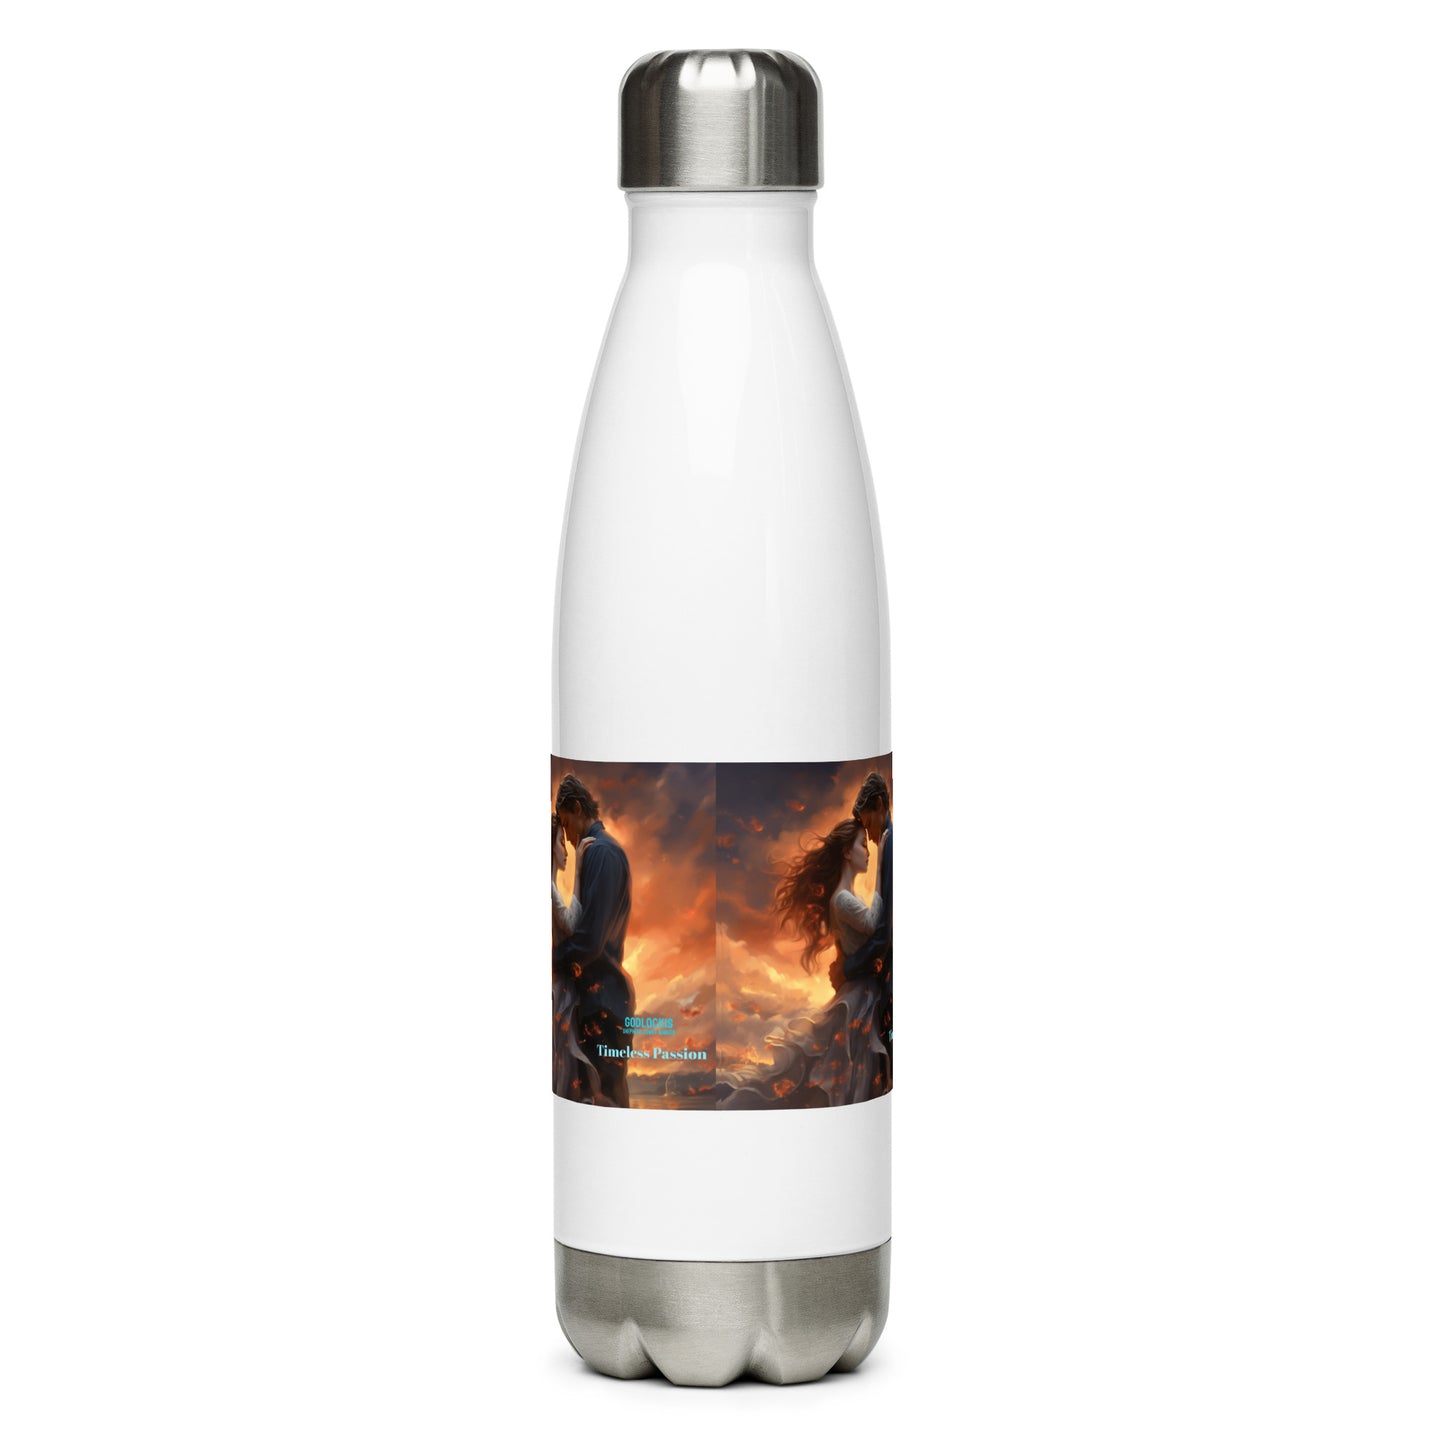 Timeless Passion FLASK Insulated Water Bottle - 17 oz, Leak-Proof Cap, Stainless Steel